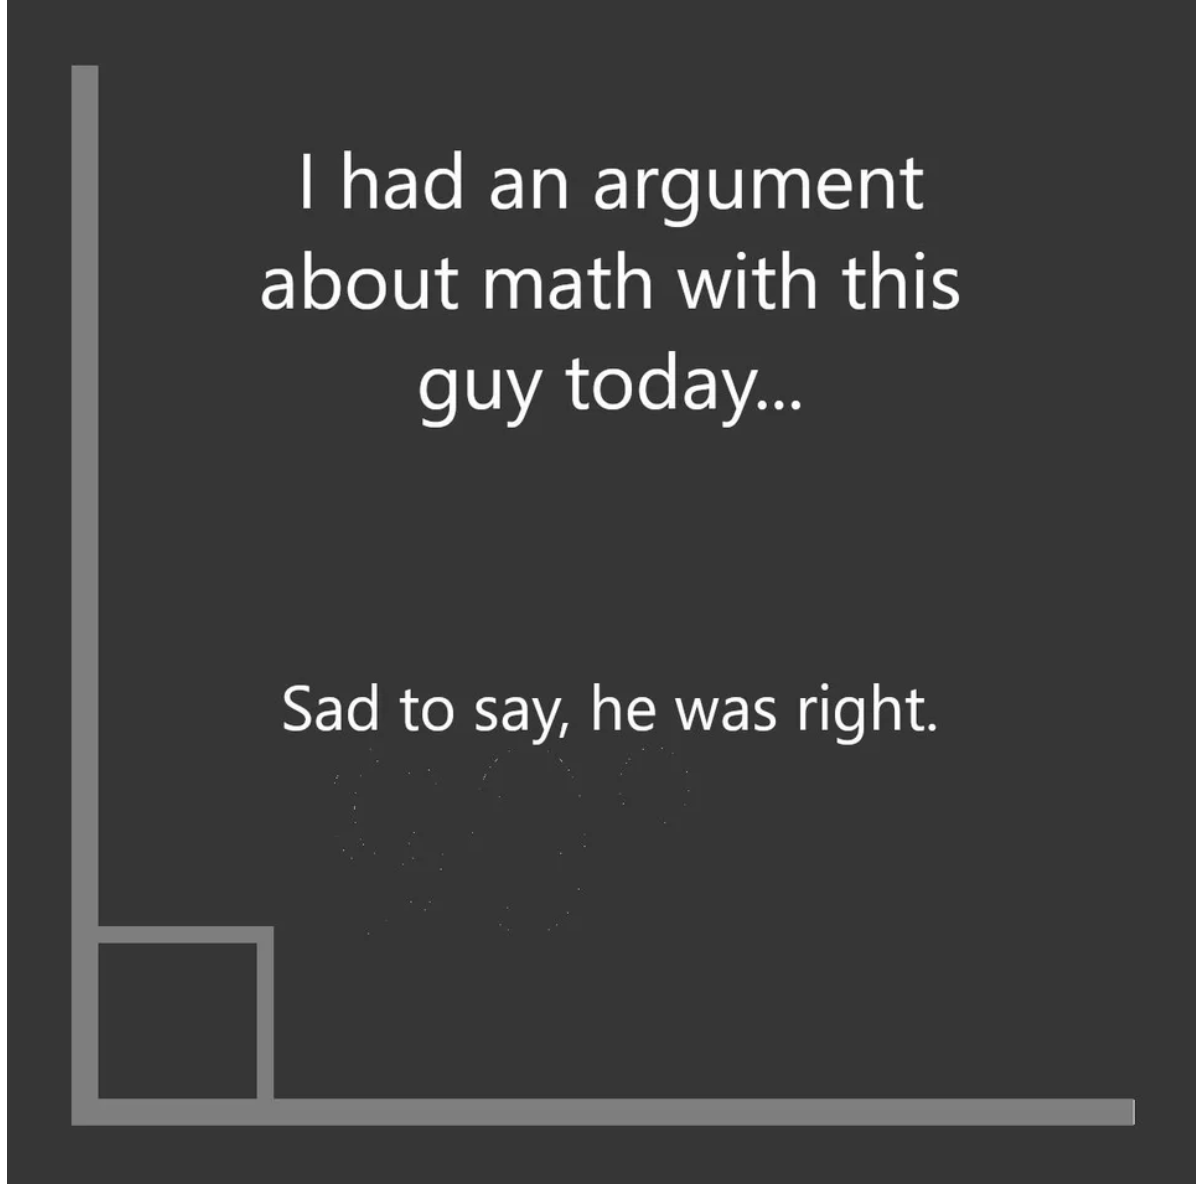 a right angle with the text &quot;I had an argument about math with this guy today... Sad to say, he was right.&quot;